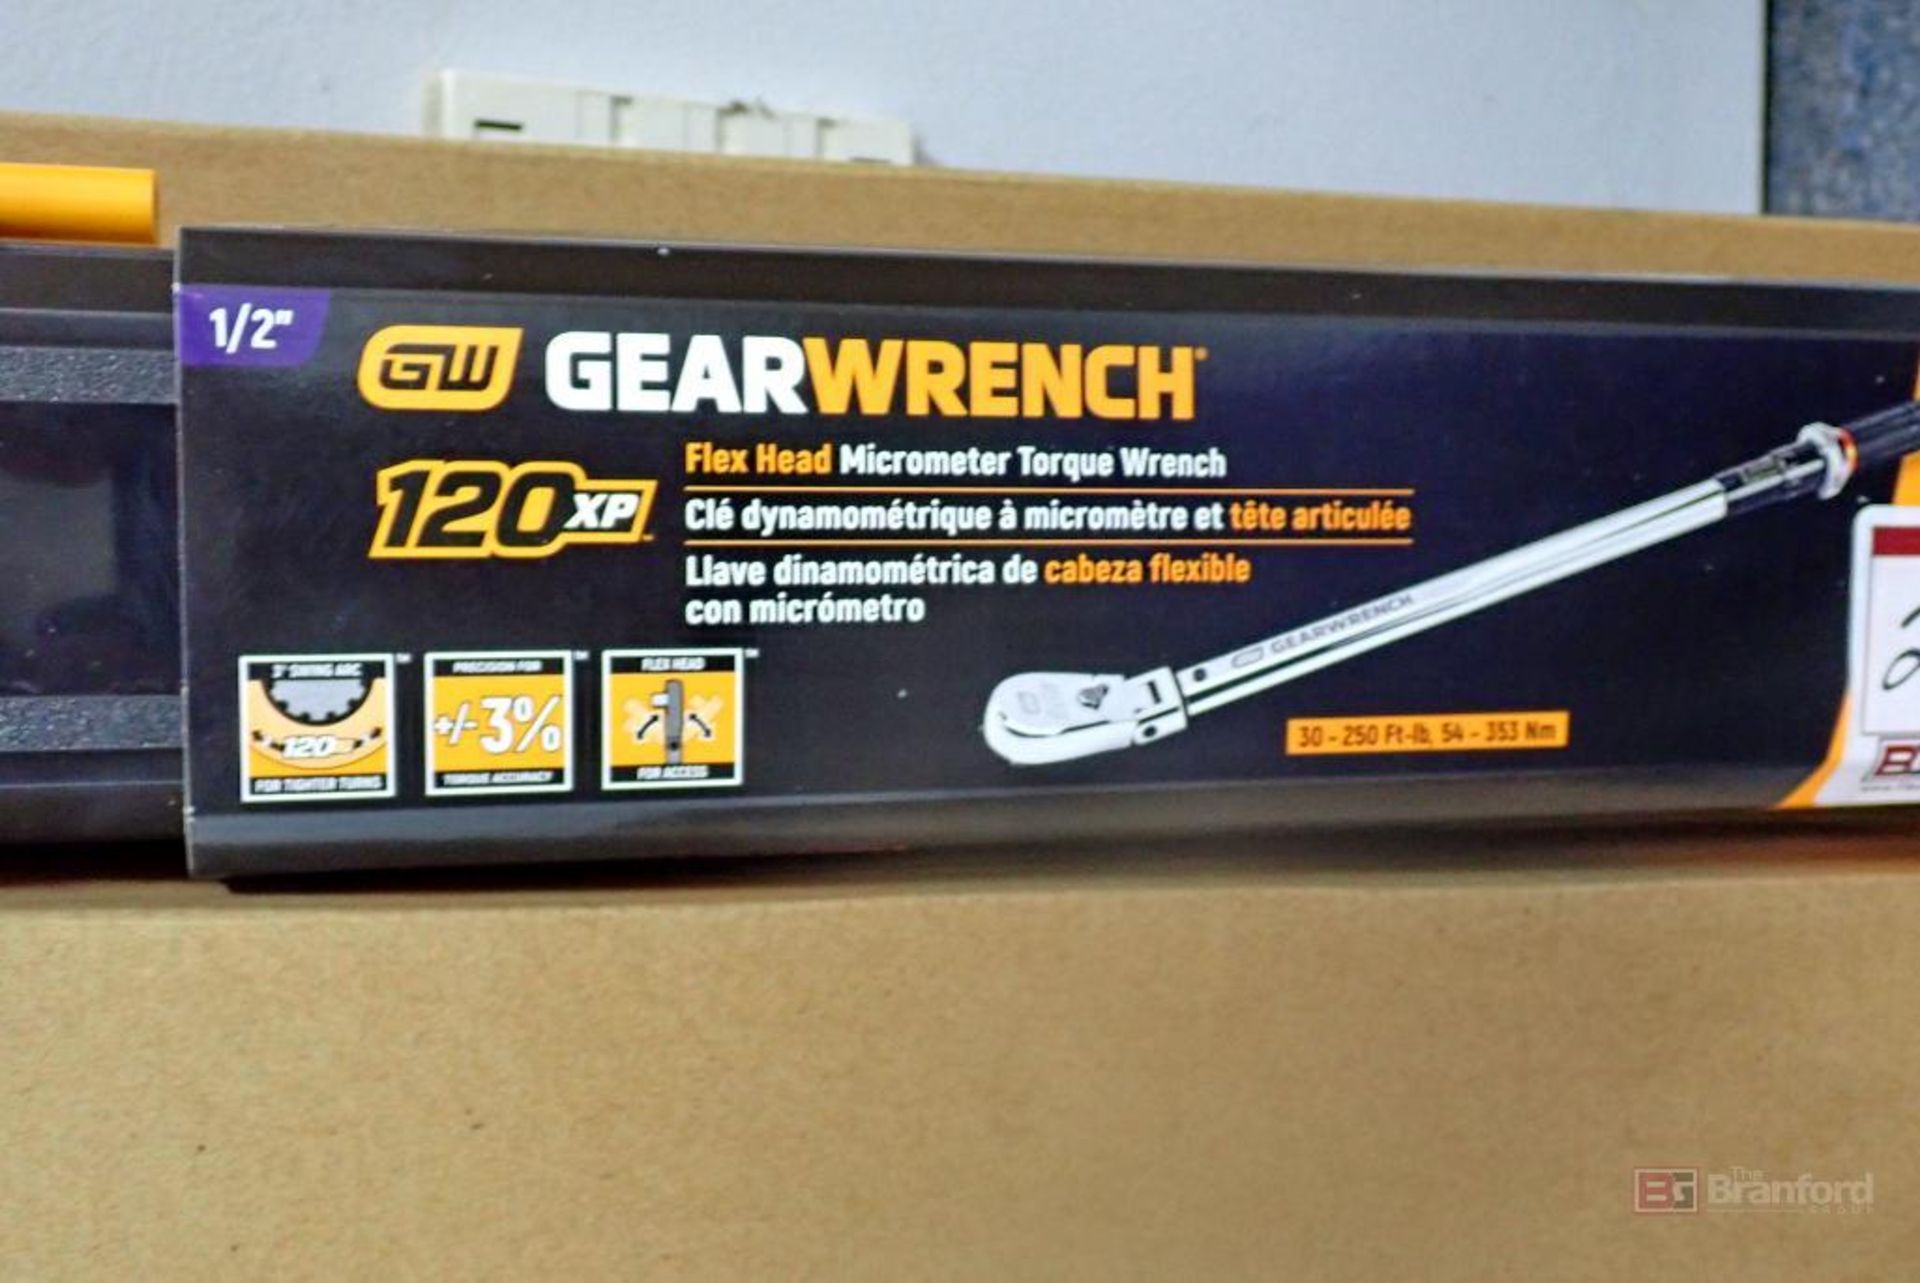 GearWrench 85189 120XP 1/2" Drive Flex Head Micrometer Torque Wrench - Image 2 of 2